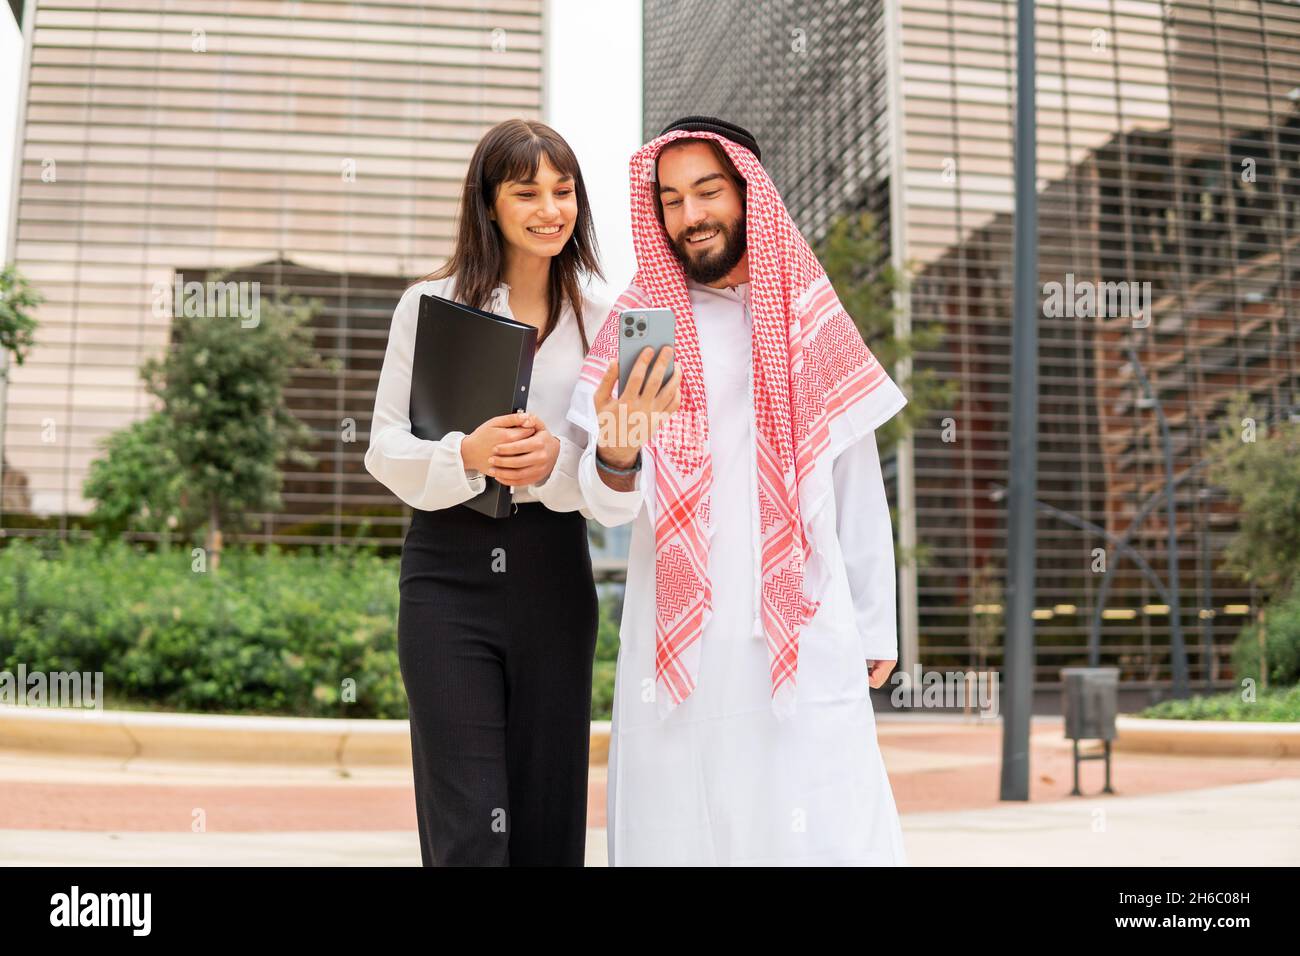 Low angle of cheerful businesswoman in Arab man in keffiyeh smiling and using smartphone together while having business meeting on street of modern city Stock Photo